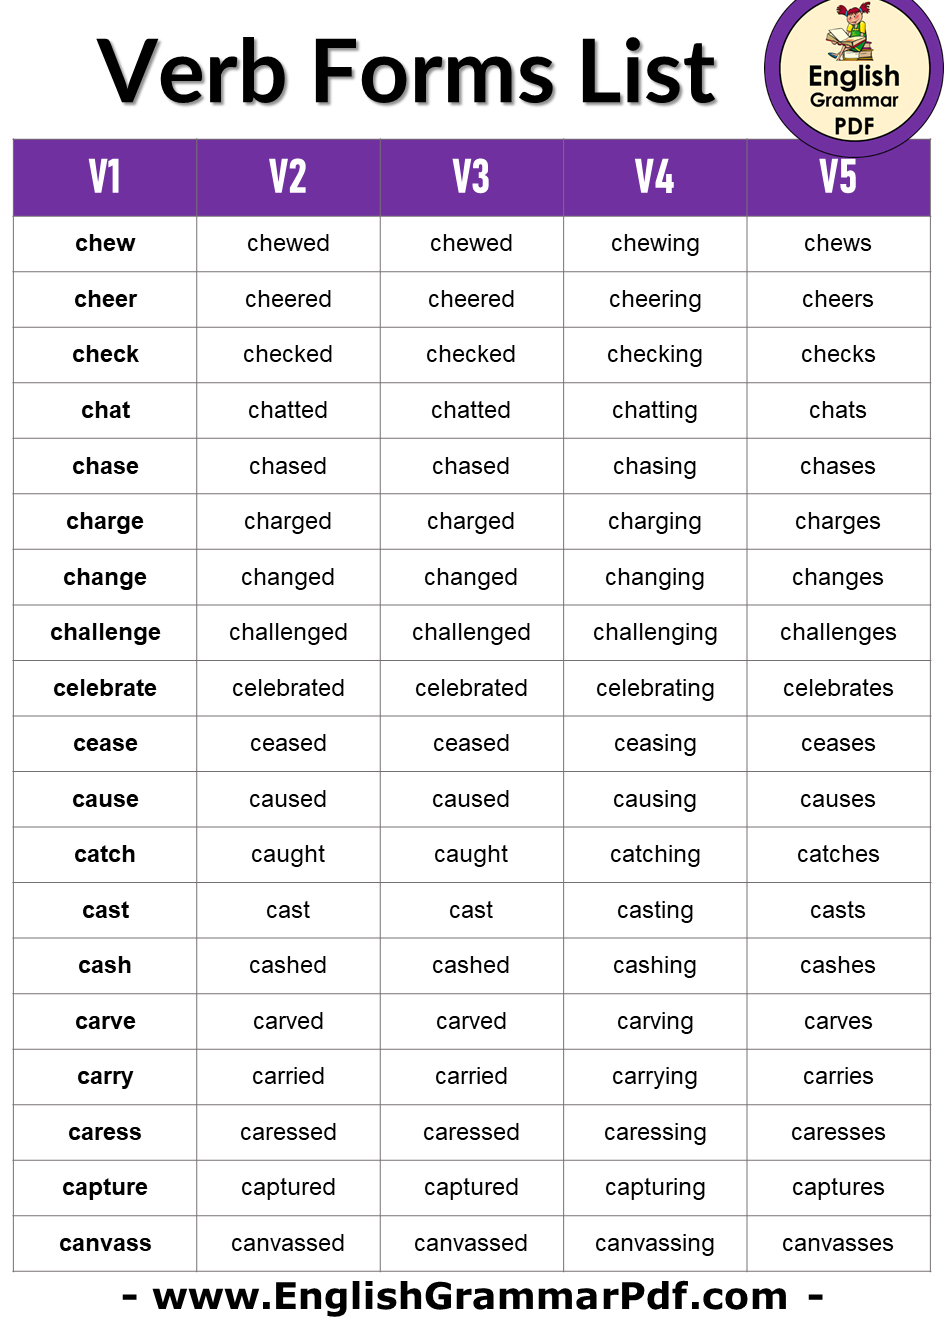 5 verb forms